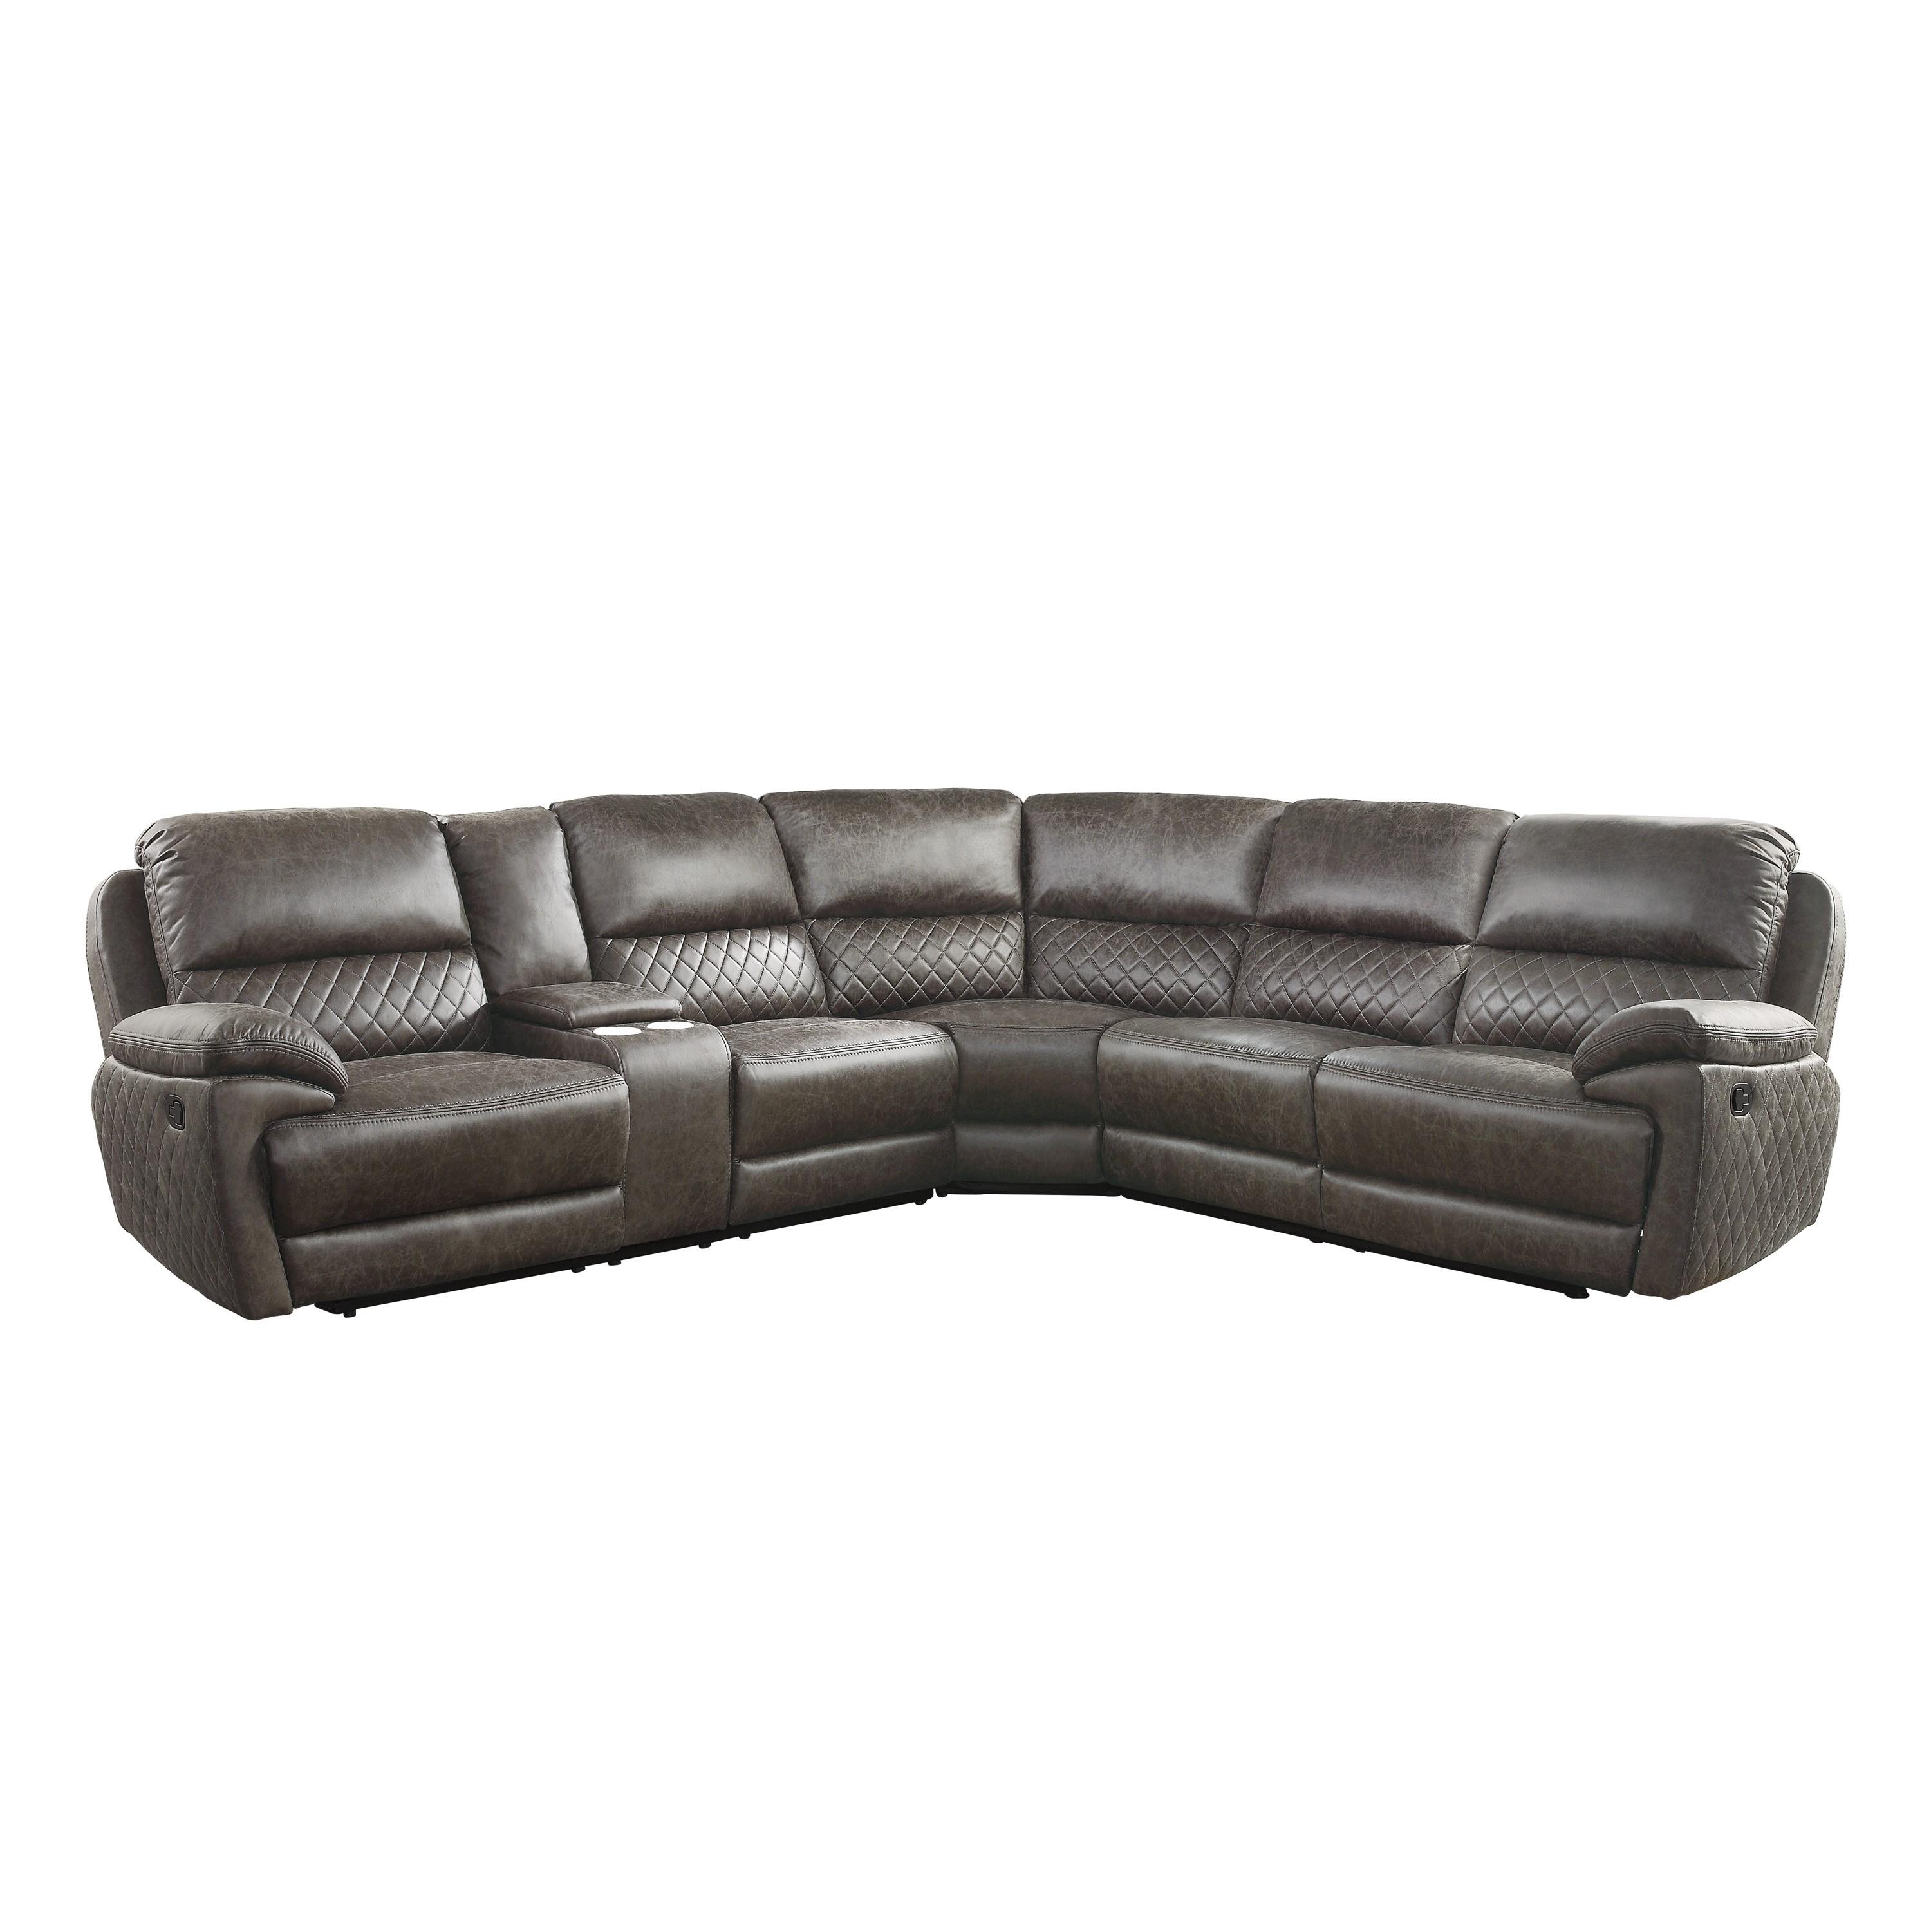 Modern Reclining Sectional 9510*SC Knoxville 9510*SC in Brown Microfiber